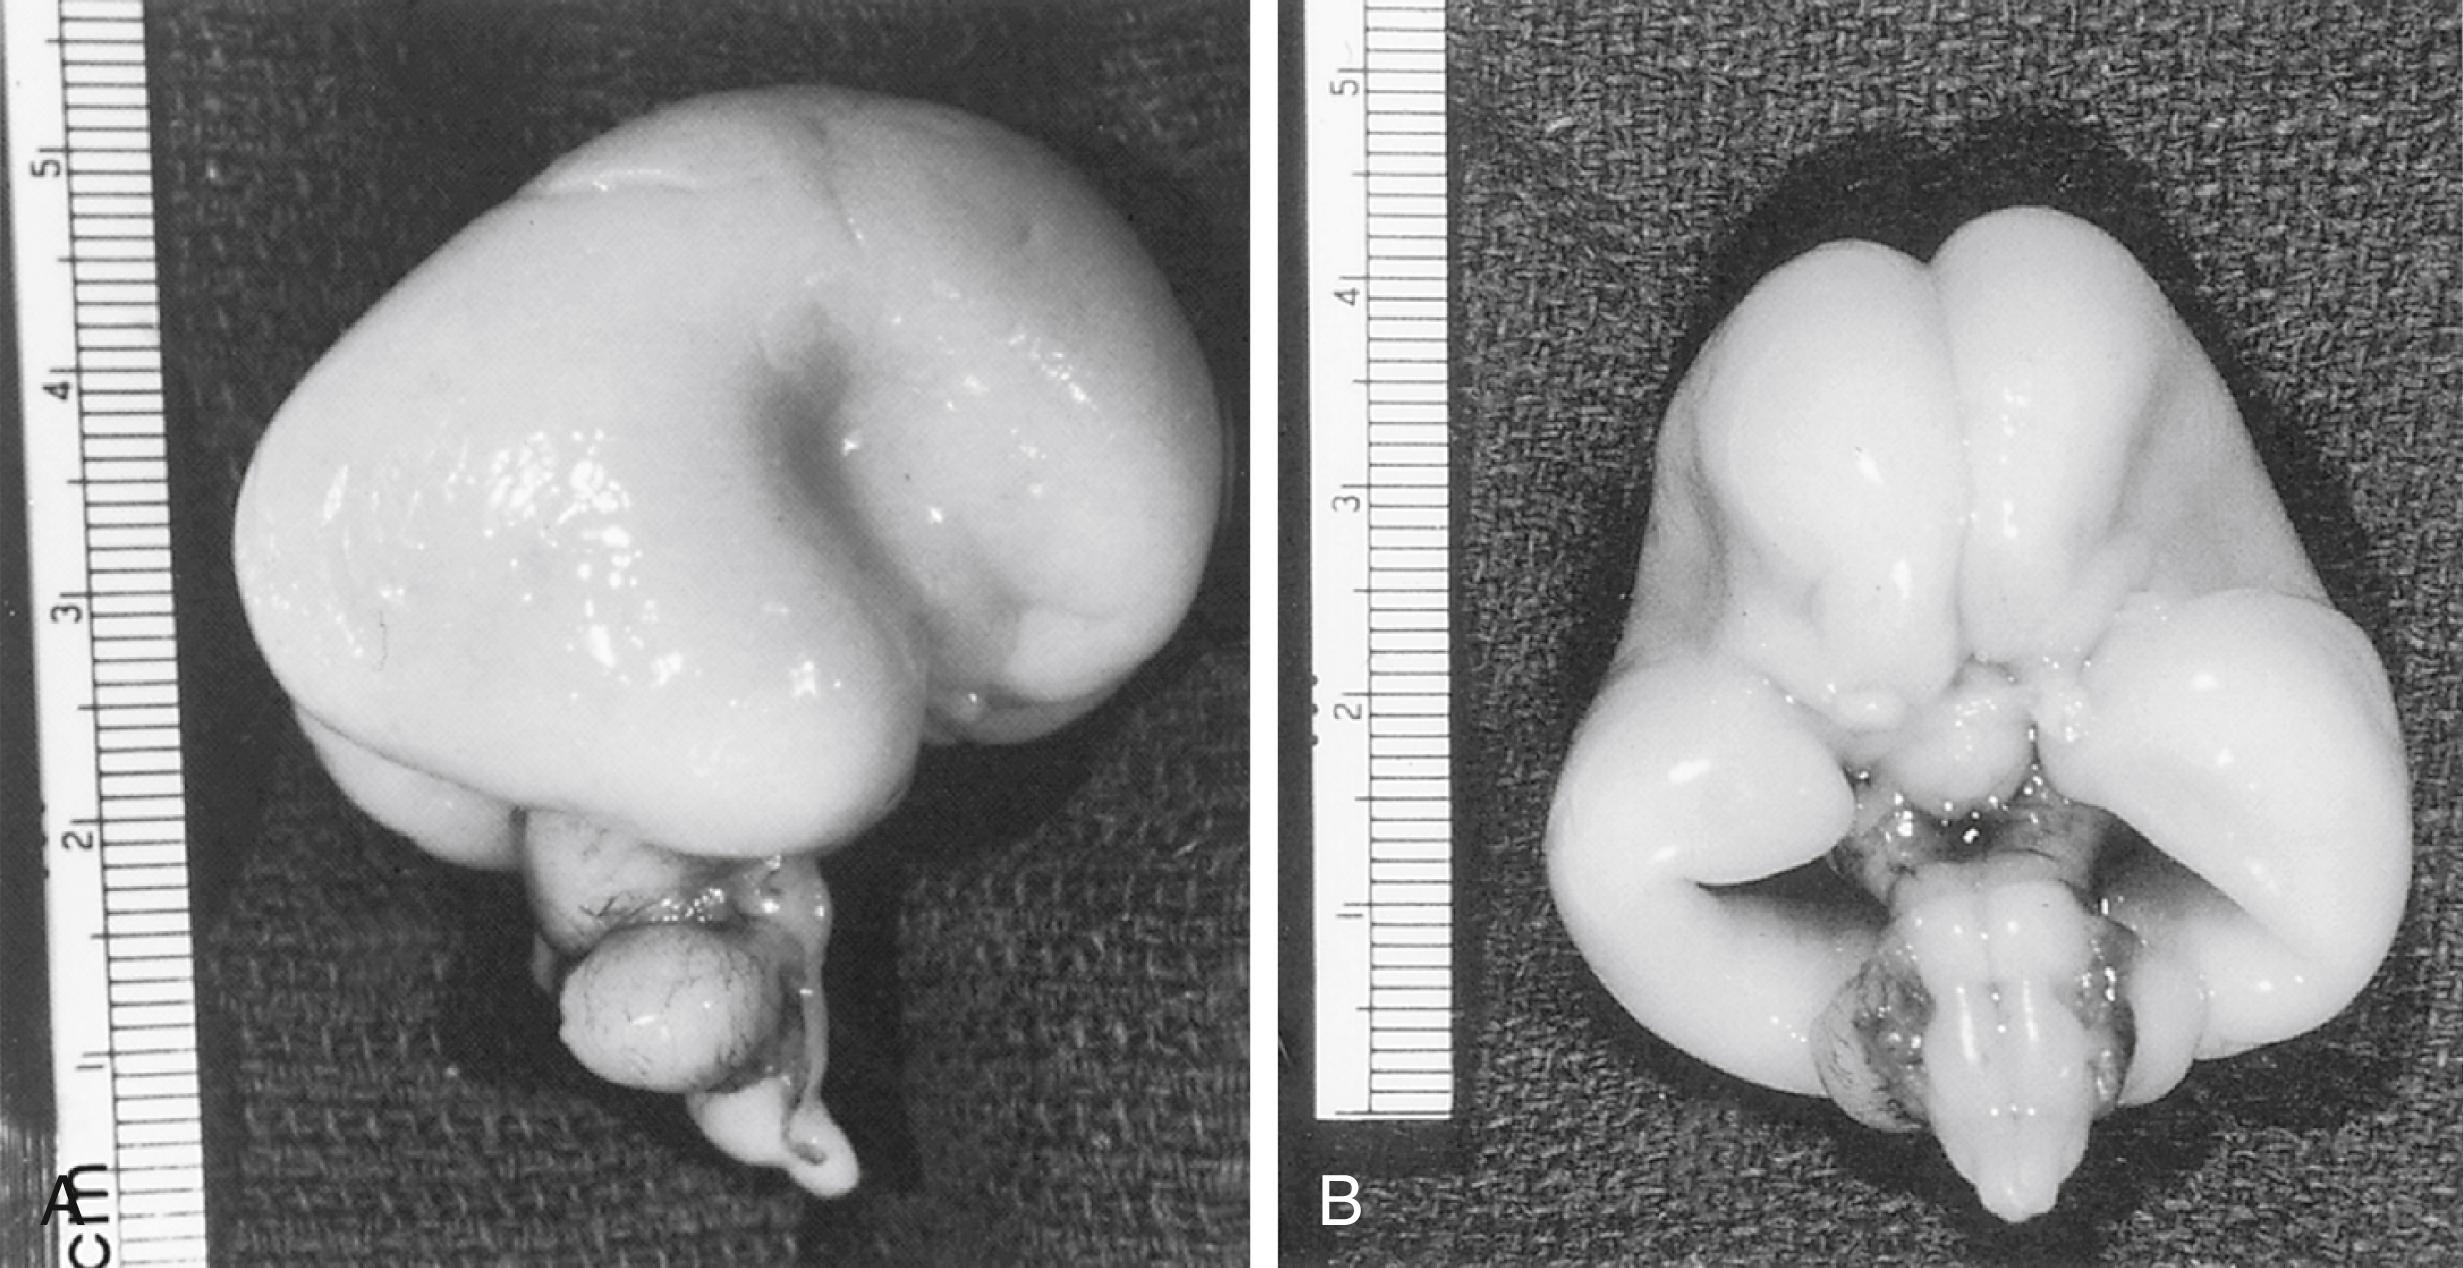 Fig. 89.3, Lateral ( A ) and ventral ( B ) views of a normal brain of a 16-week fetus. Primary fissures (e.g., sylvian, calcarine) are formed early in gestation, but primary sulci, such as the central and parieto-occipital, form at midgestation, and secondary and tertiary sulci and gyri develop after 22 weeks. At midgestation the surface of the cortex is essentially smooth.